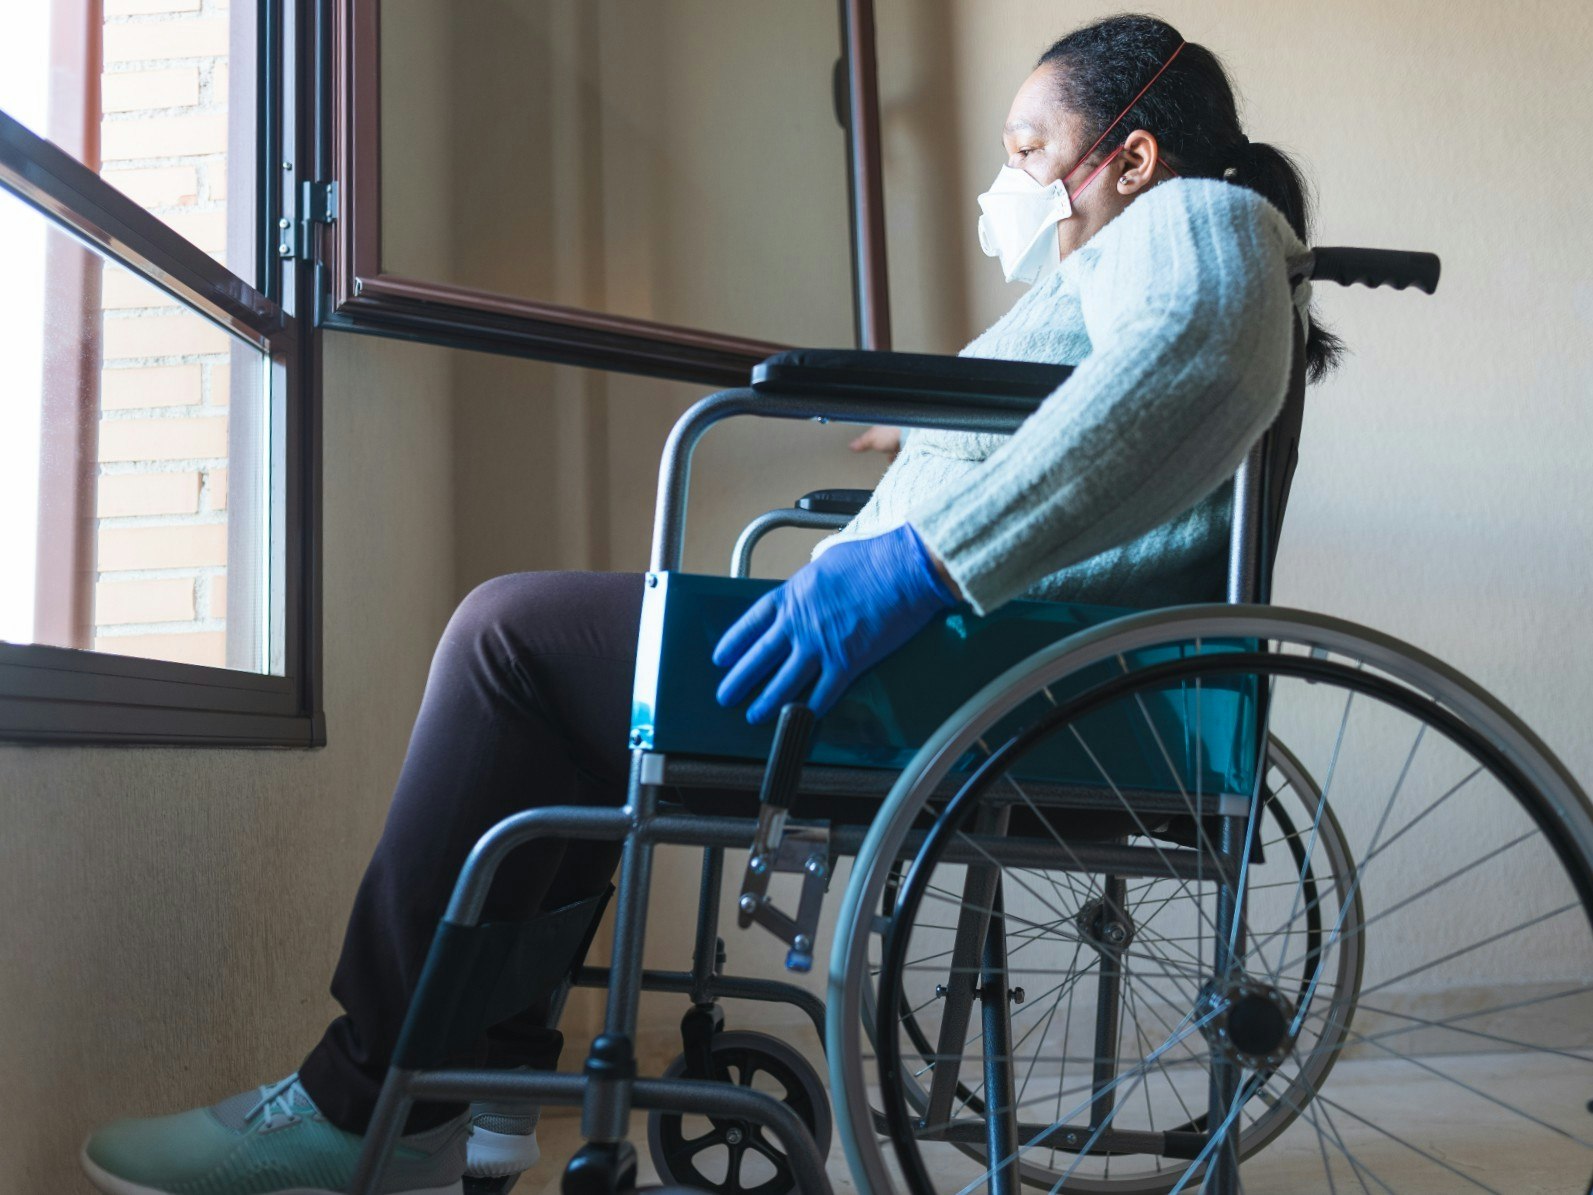 <p>More than 80 staff and clients of a NSW group home are self-isolating after a worker tested positive for COVID-19 before passing it on to three residents and another employee. [Source: Shutterstock]</p>
